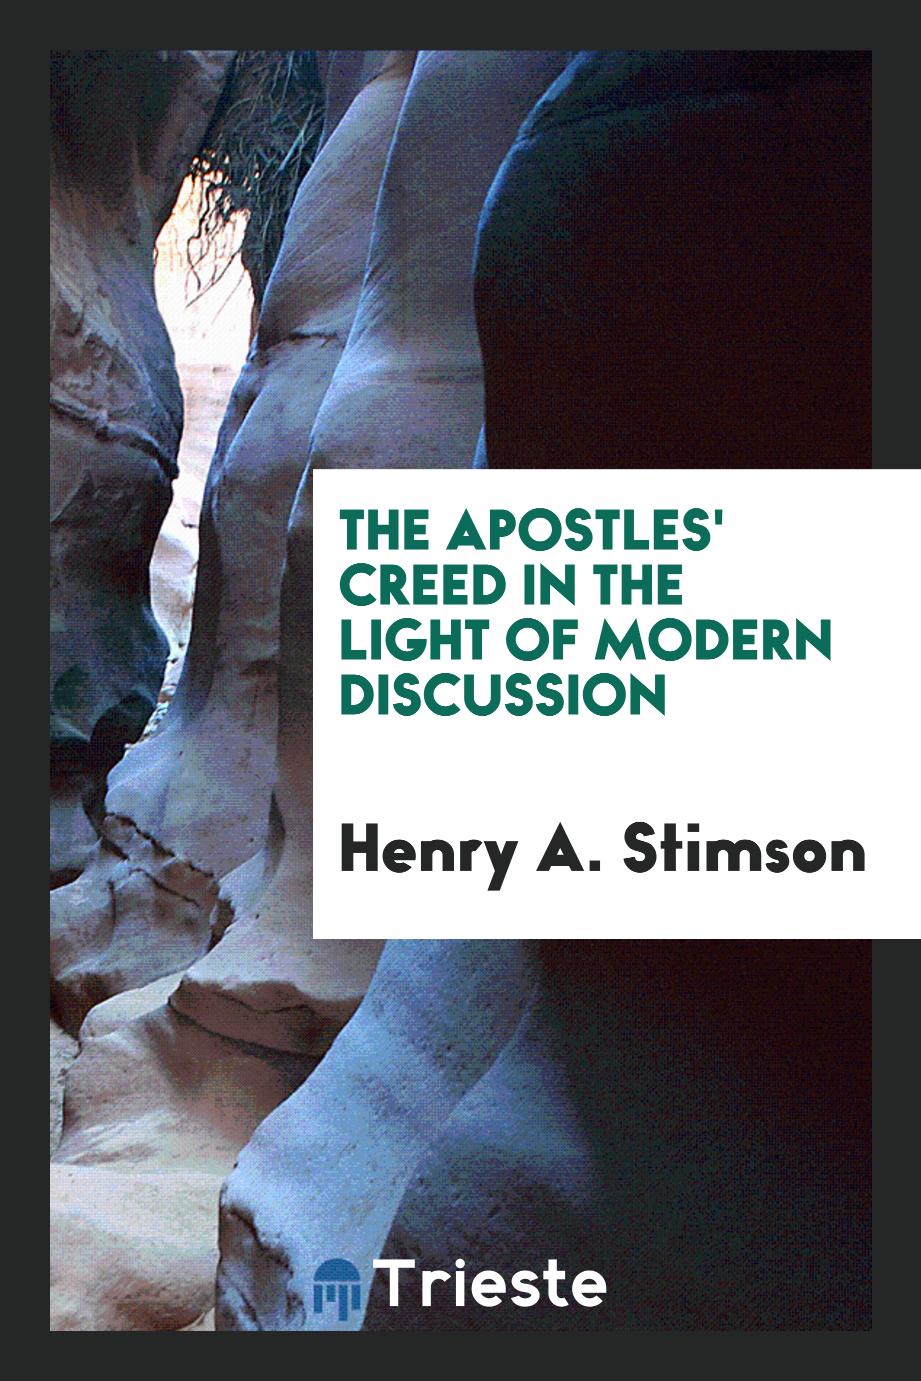 The Apostles' Creed in the Light of Modern Discussion